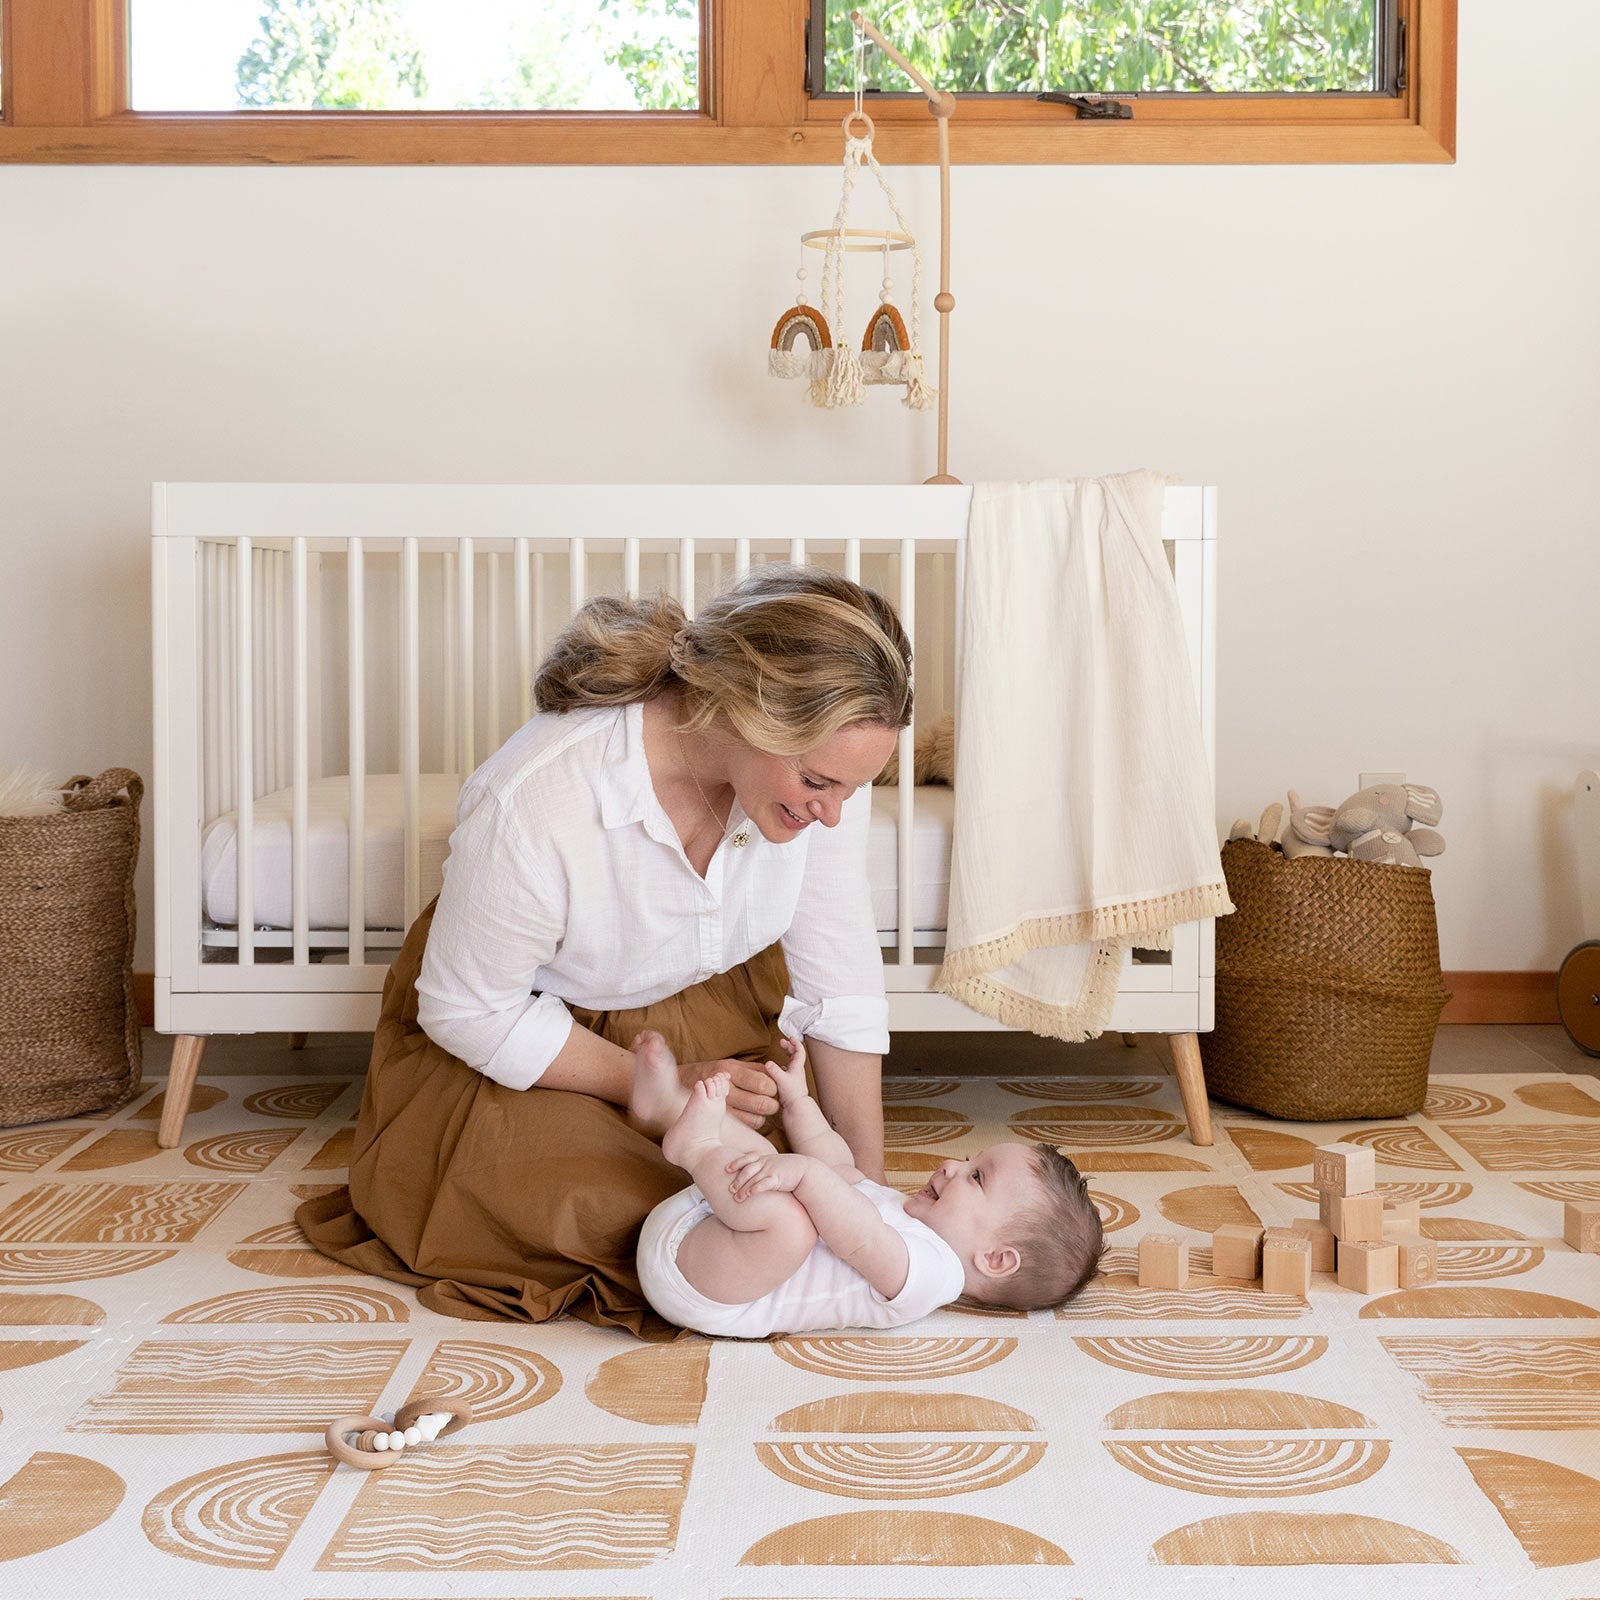 Ada modern minimalist baby play mat in Sunflower, mustard yellow and off white. Shown in a nursery with Mom and baby playing.